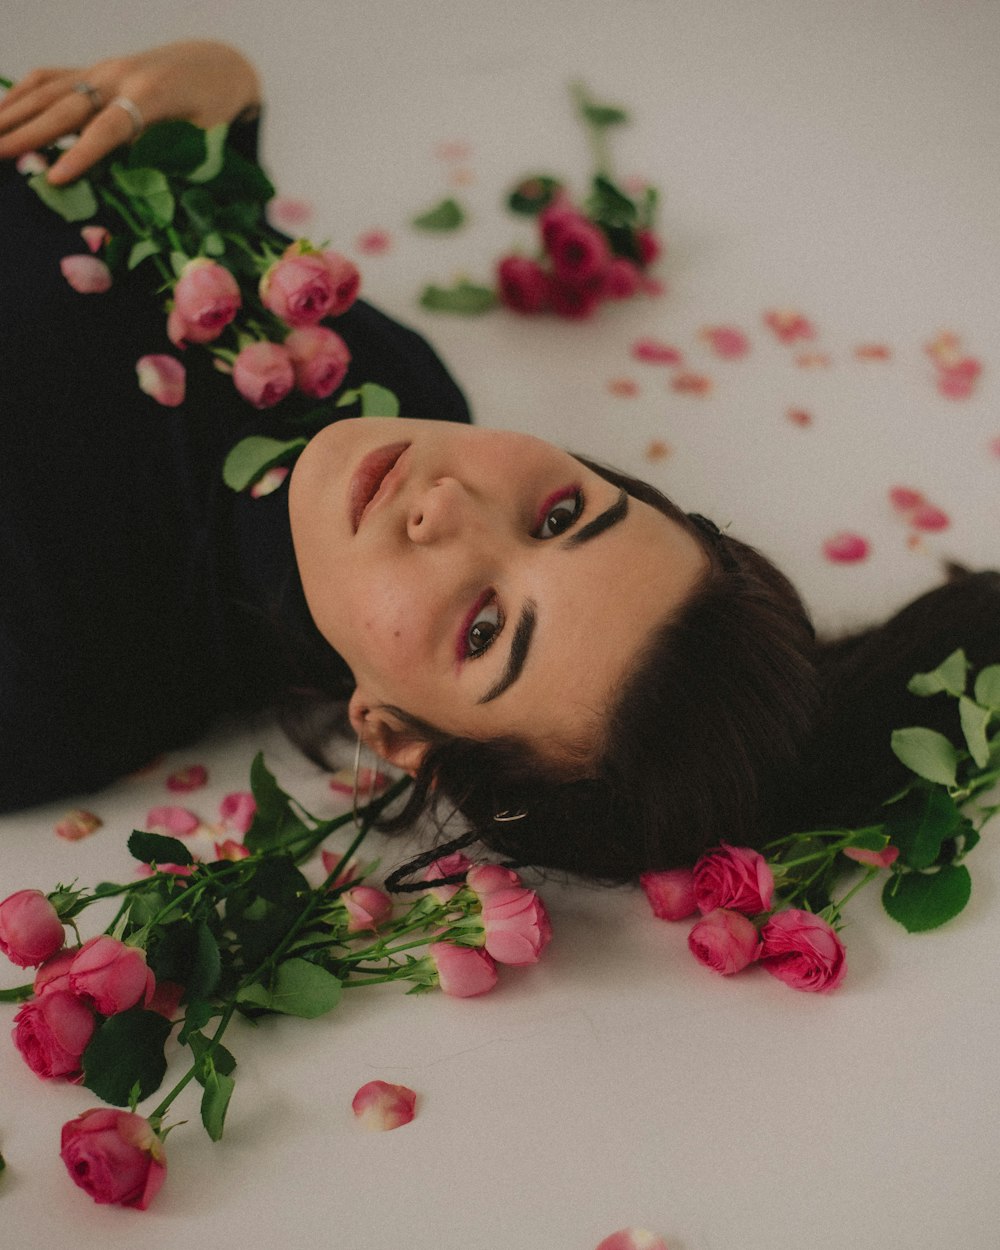 a woman laying on the ground surrounded by flowers